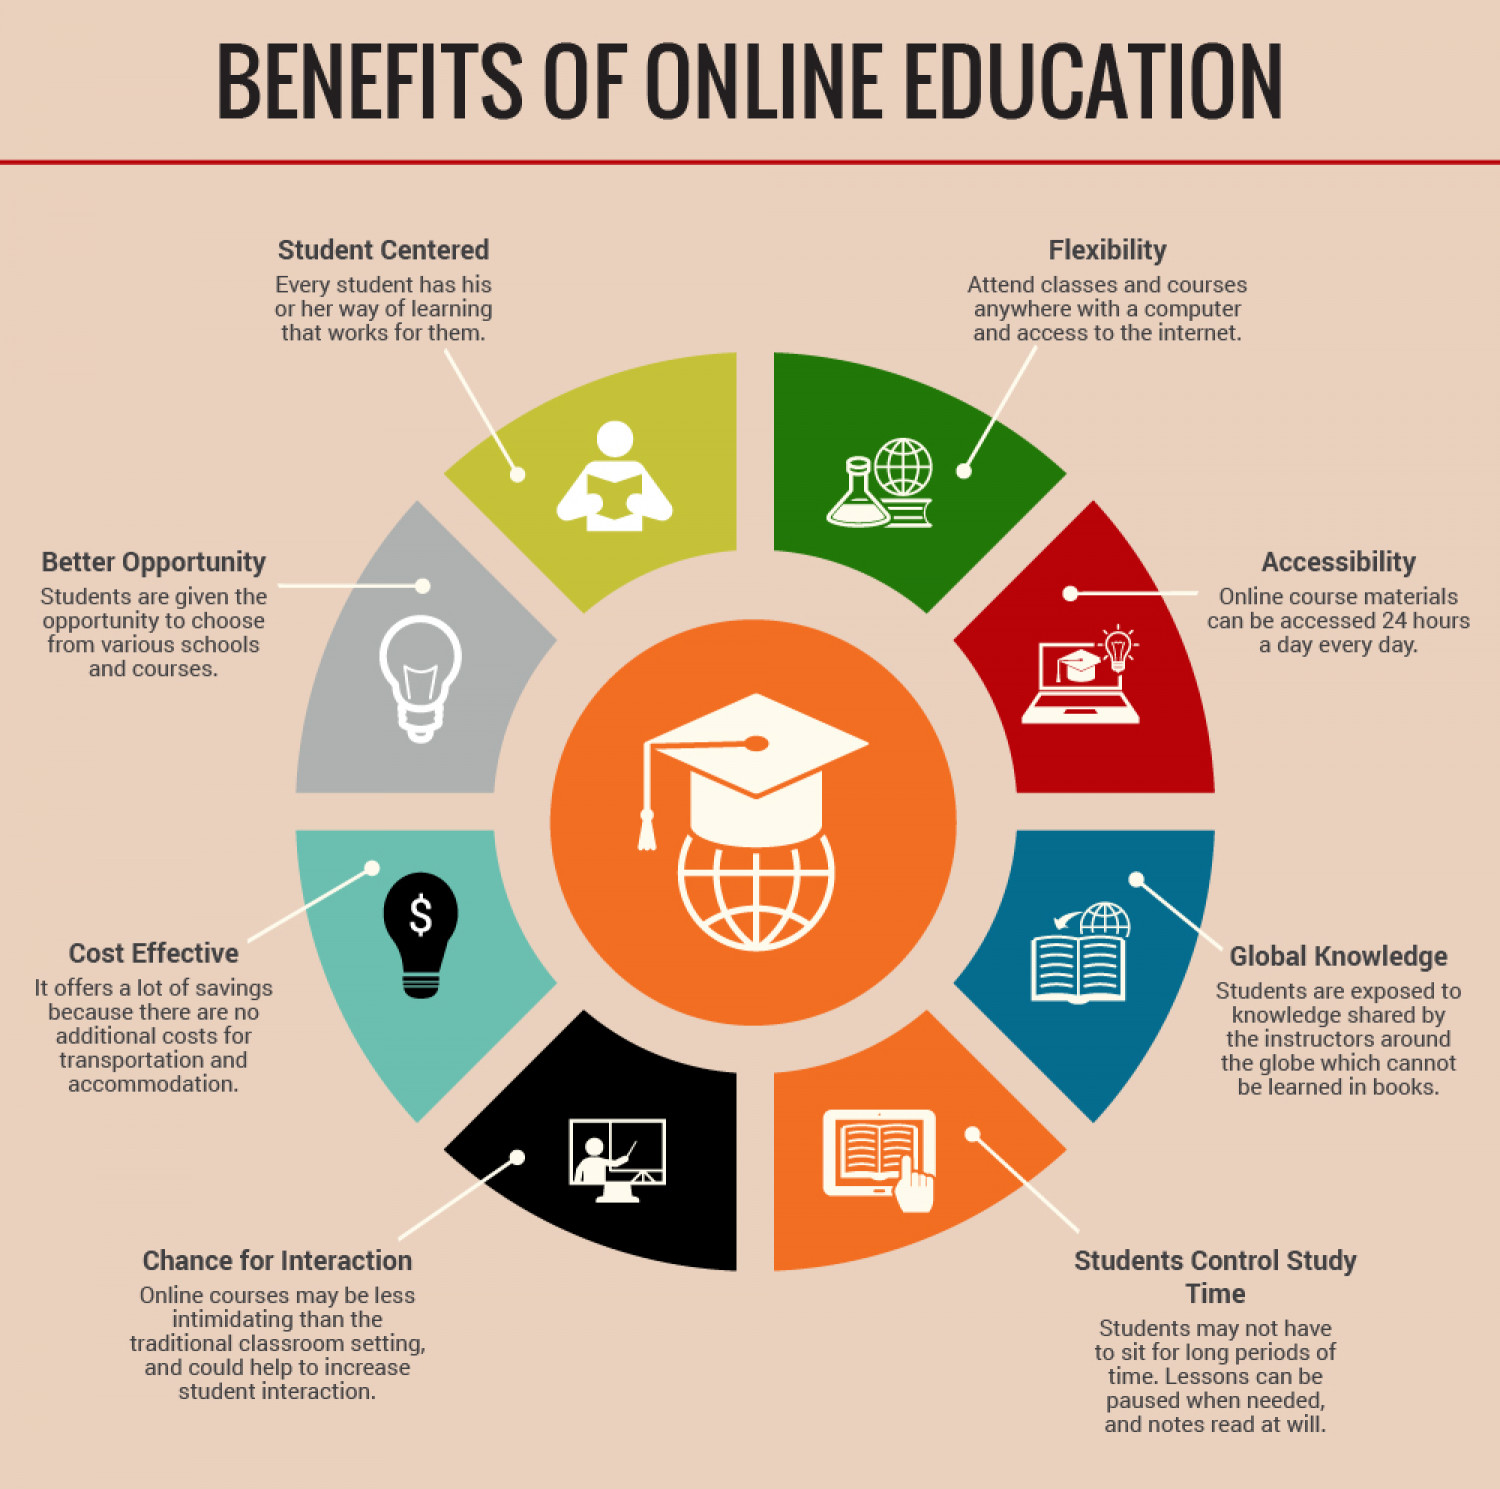 eLearning Education System - Why Digital Transformation is Necessary for Schools - Top 5 Reasons